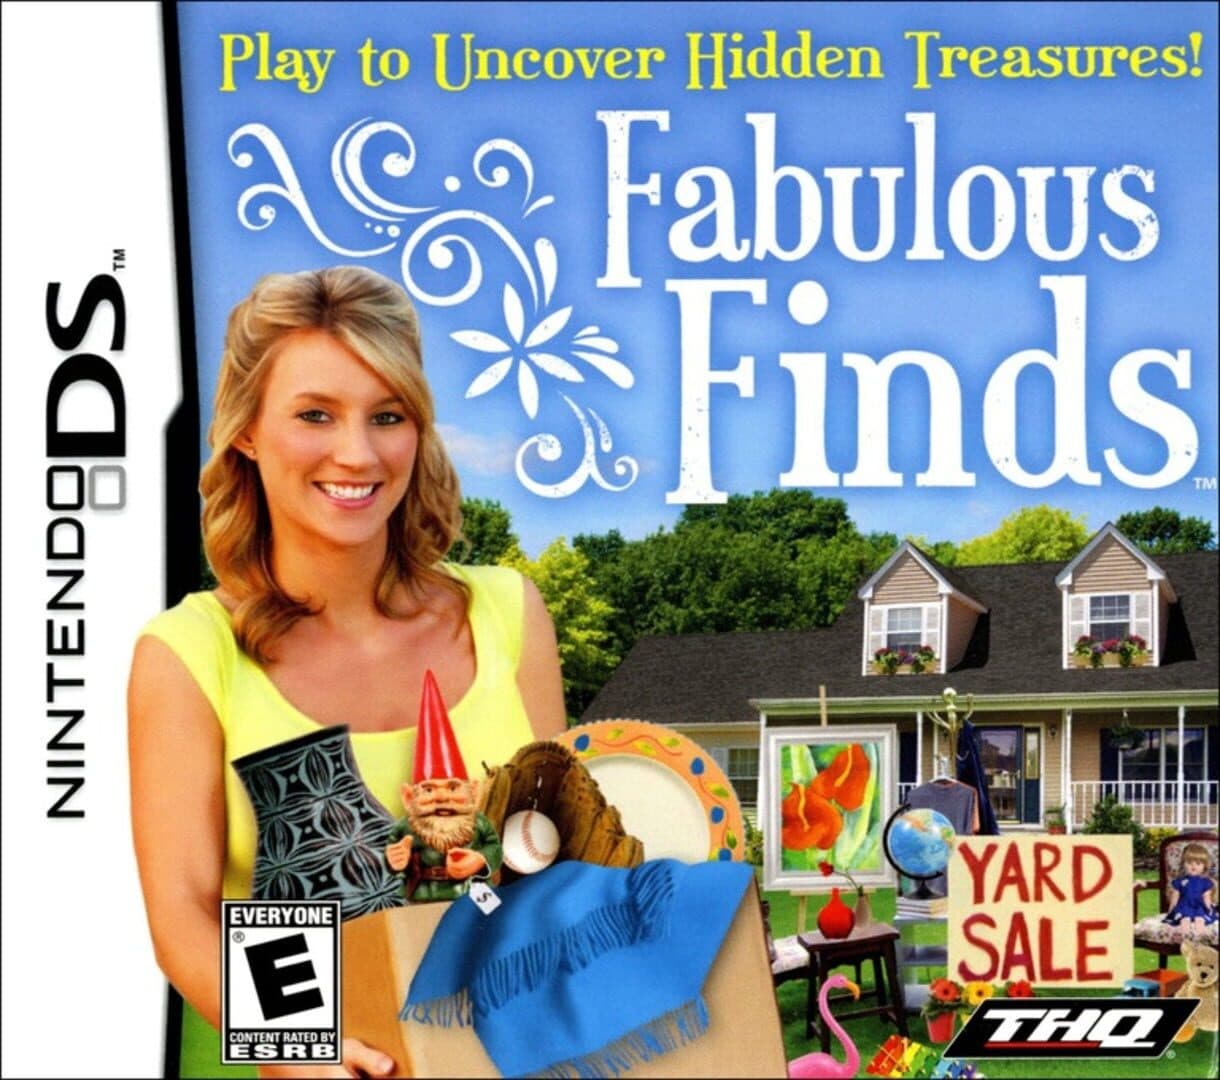 Fabulous Finds cover art